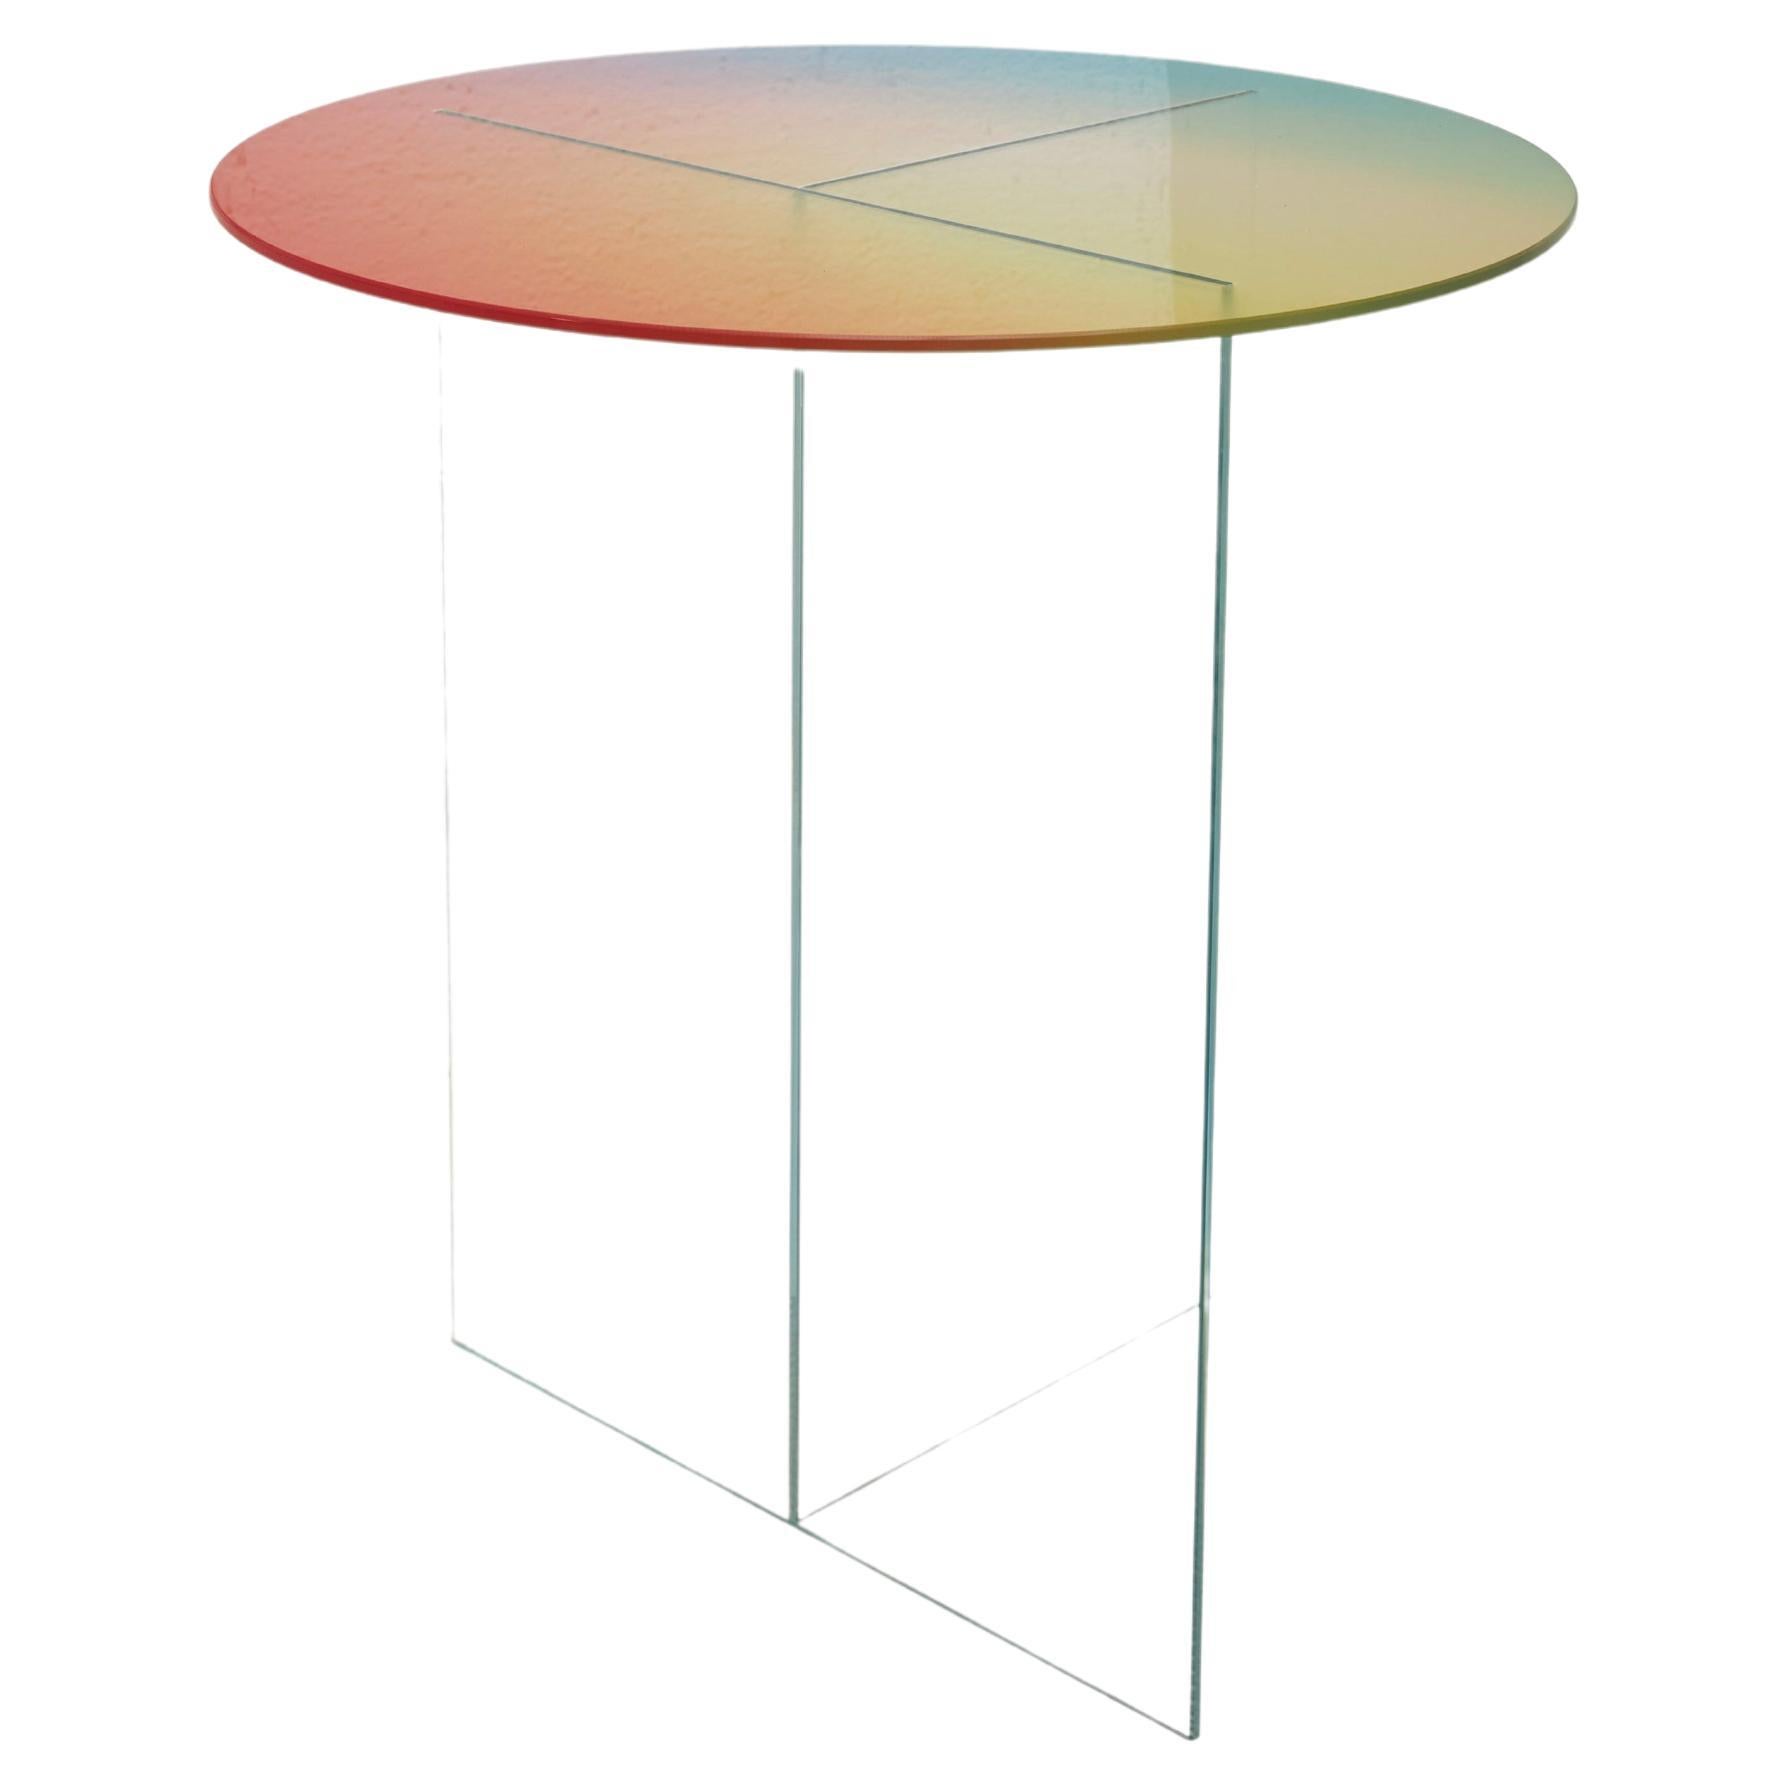 The inspiration behind the Cosmos Coffee Table stems from the idea that different colors and ideas can coexist in harmony, reflecting the vibrant texture of our multicultural environment. Prepared by talented craftsmen, this product is created by